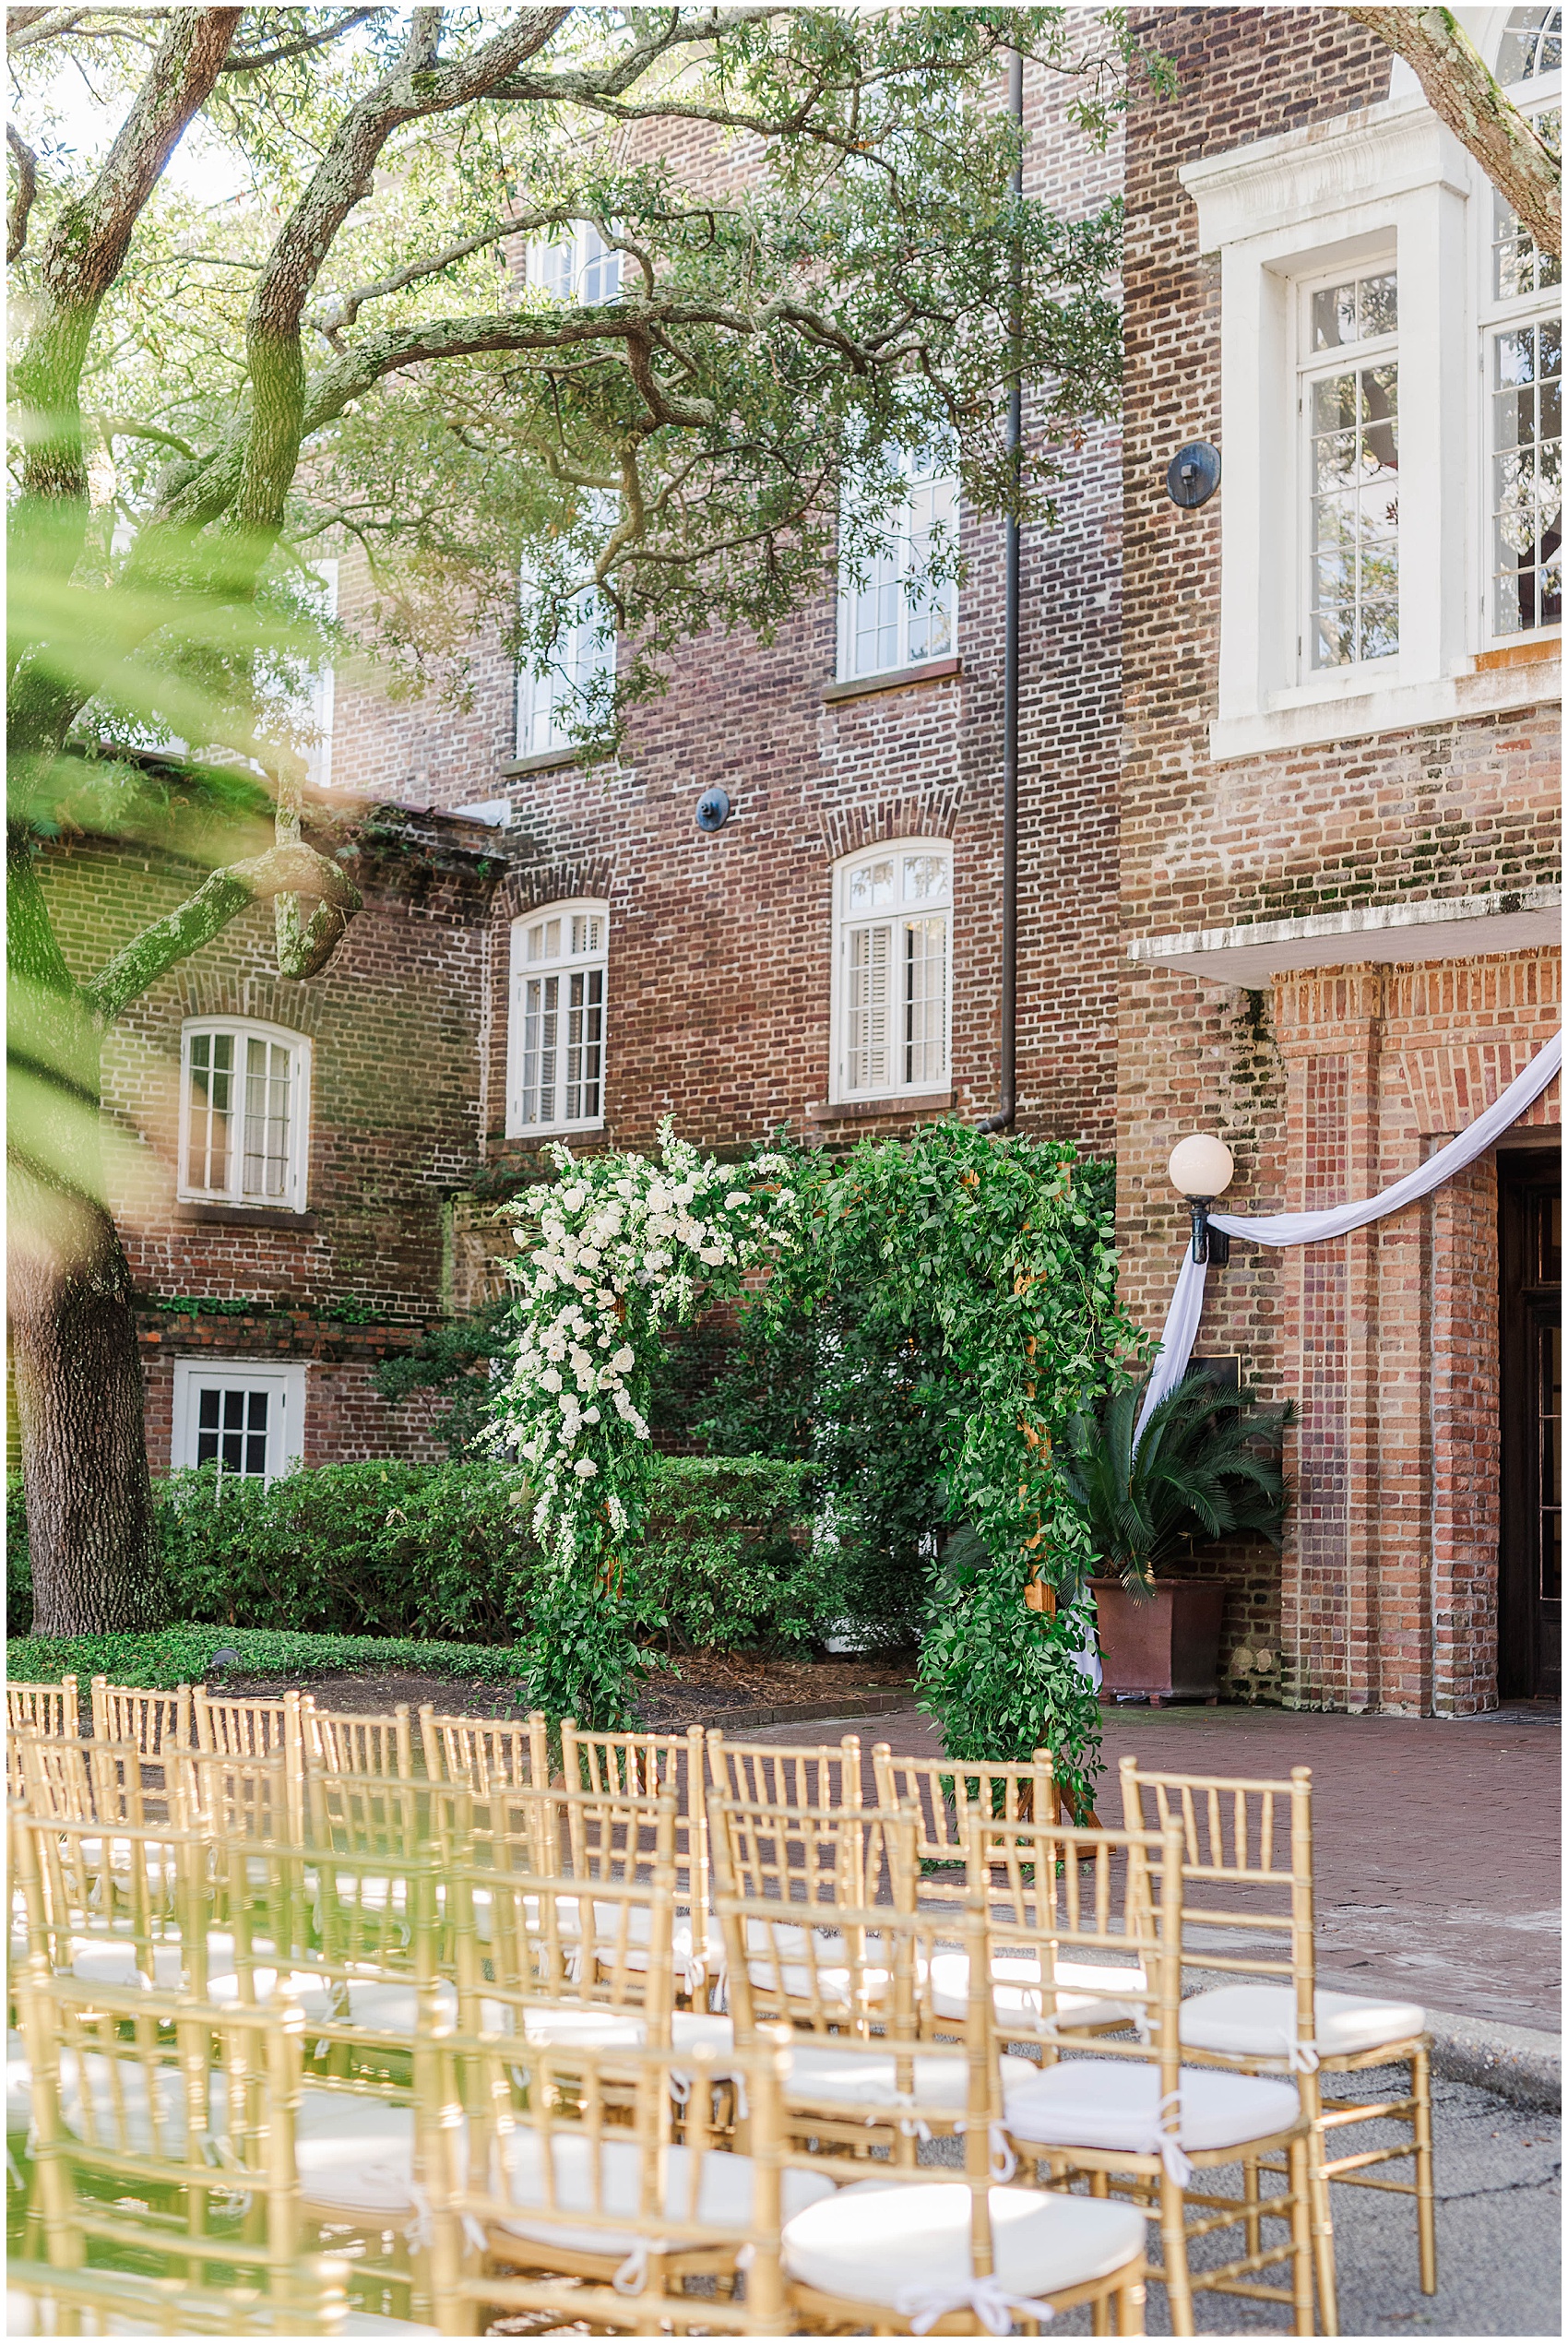 ceremony location at the Historic Rice mill wedding venue